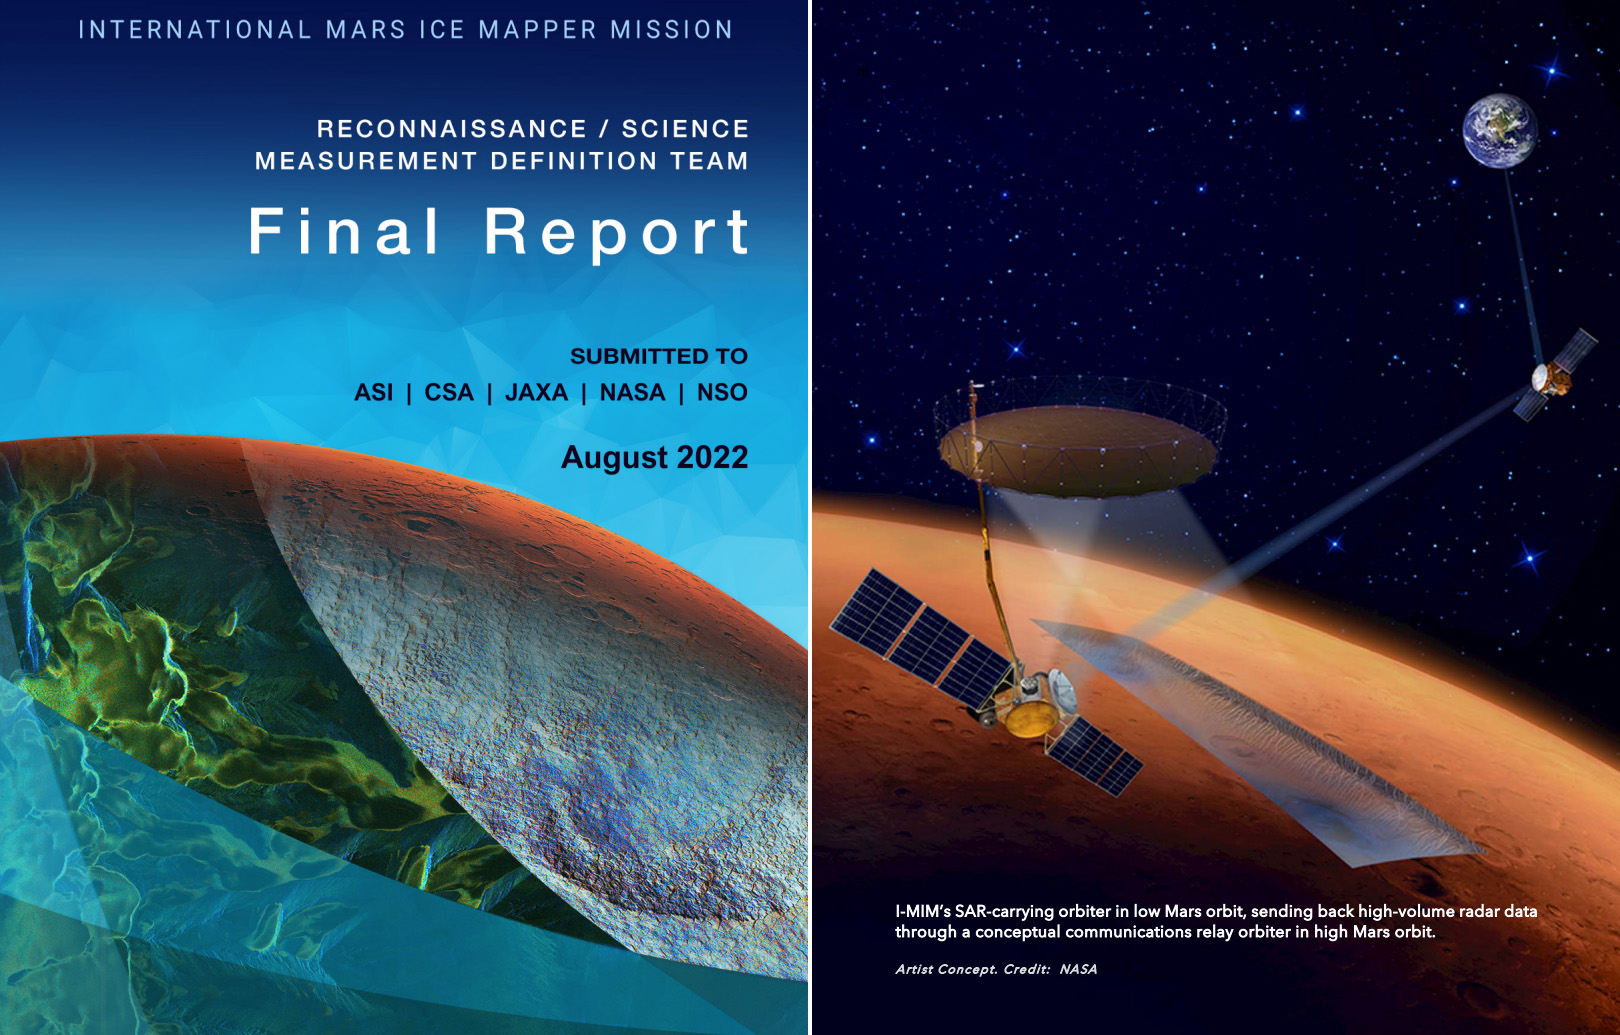 Two-page spread from the "International Mars Ice Mapper Mission Reconnaissance / Science Measurement Definition Team Final Report" submitted to ASI, CSA, JAXA, NASA, and NSO in August 2022. The left page is the report cover featuring a stylized image of Mars with a blue gradient background. The right page shows an artist's concept of the I-MIM mission: a SAR-carrying orbiter in low Mars orbit transmitting high-volume radar data to a communications relay orbiter in high Mars orbit, with Earth visible in the background. Credit for the concept image goes to NASA.